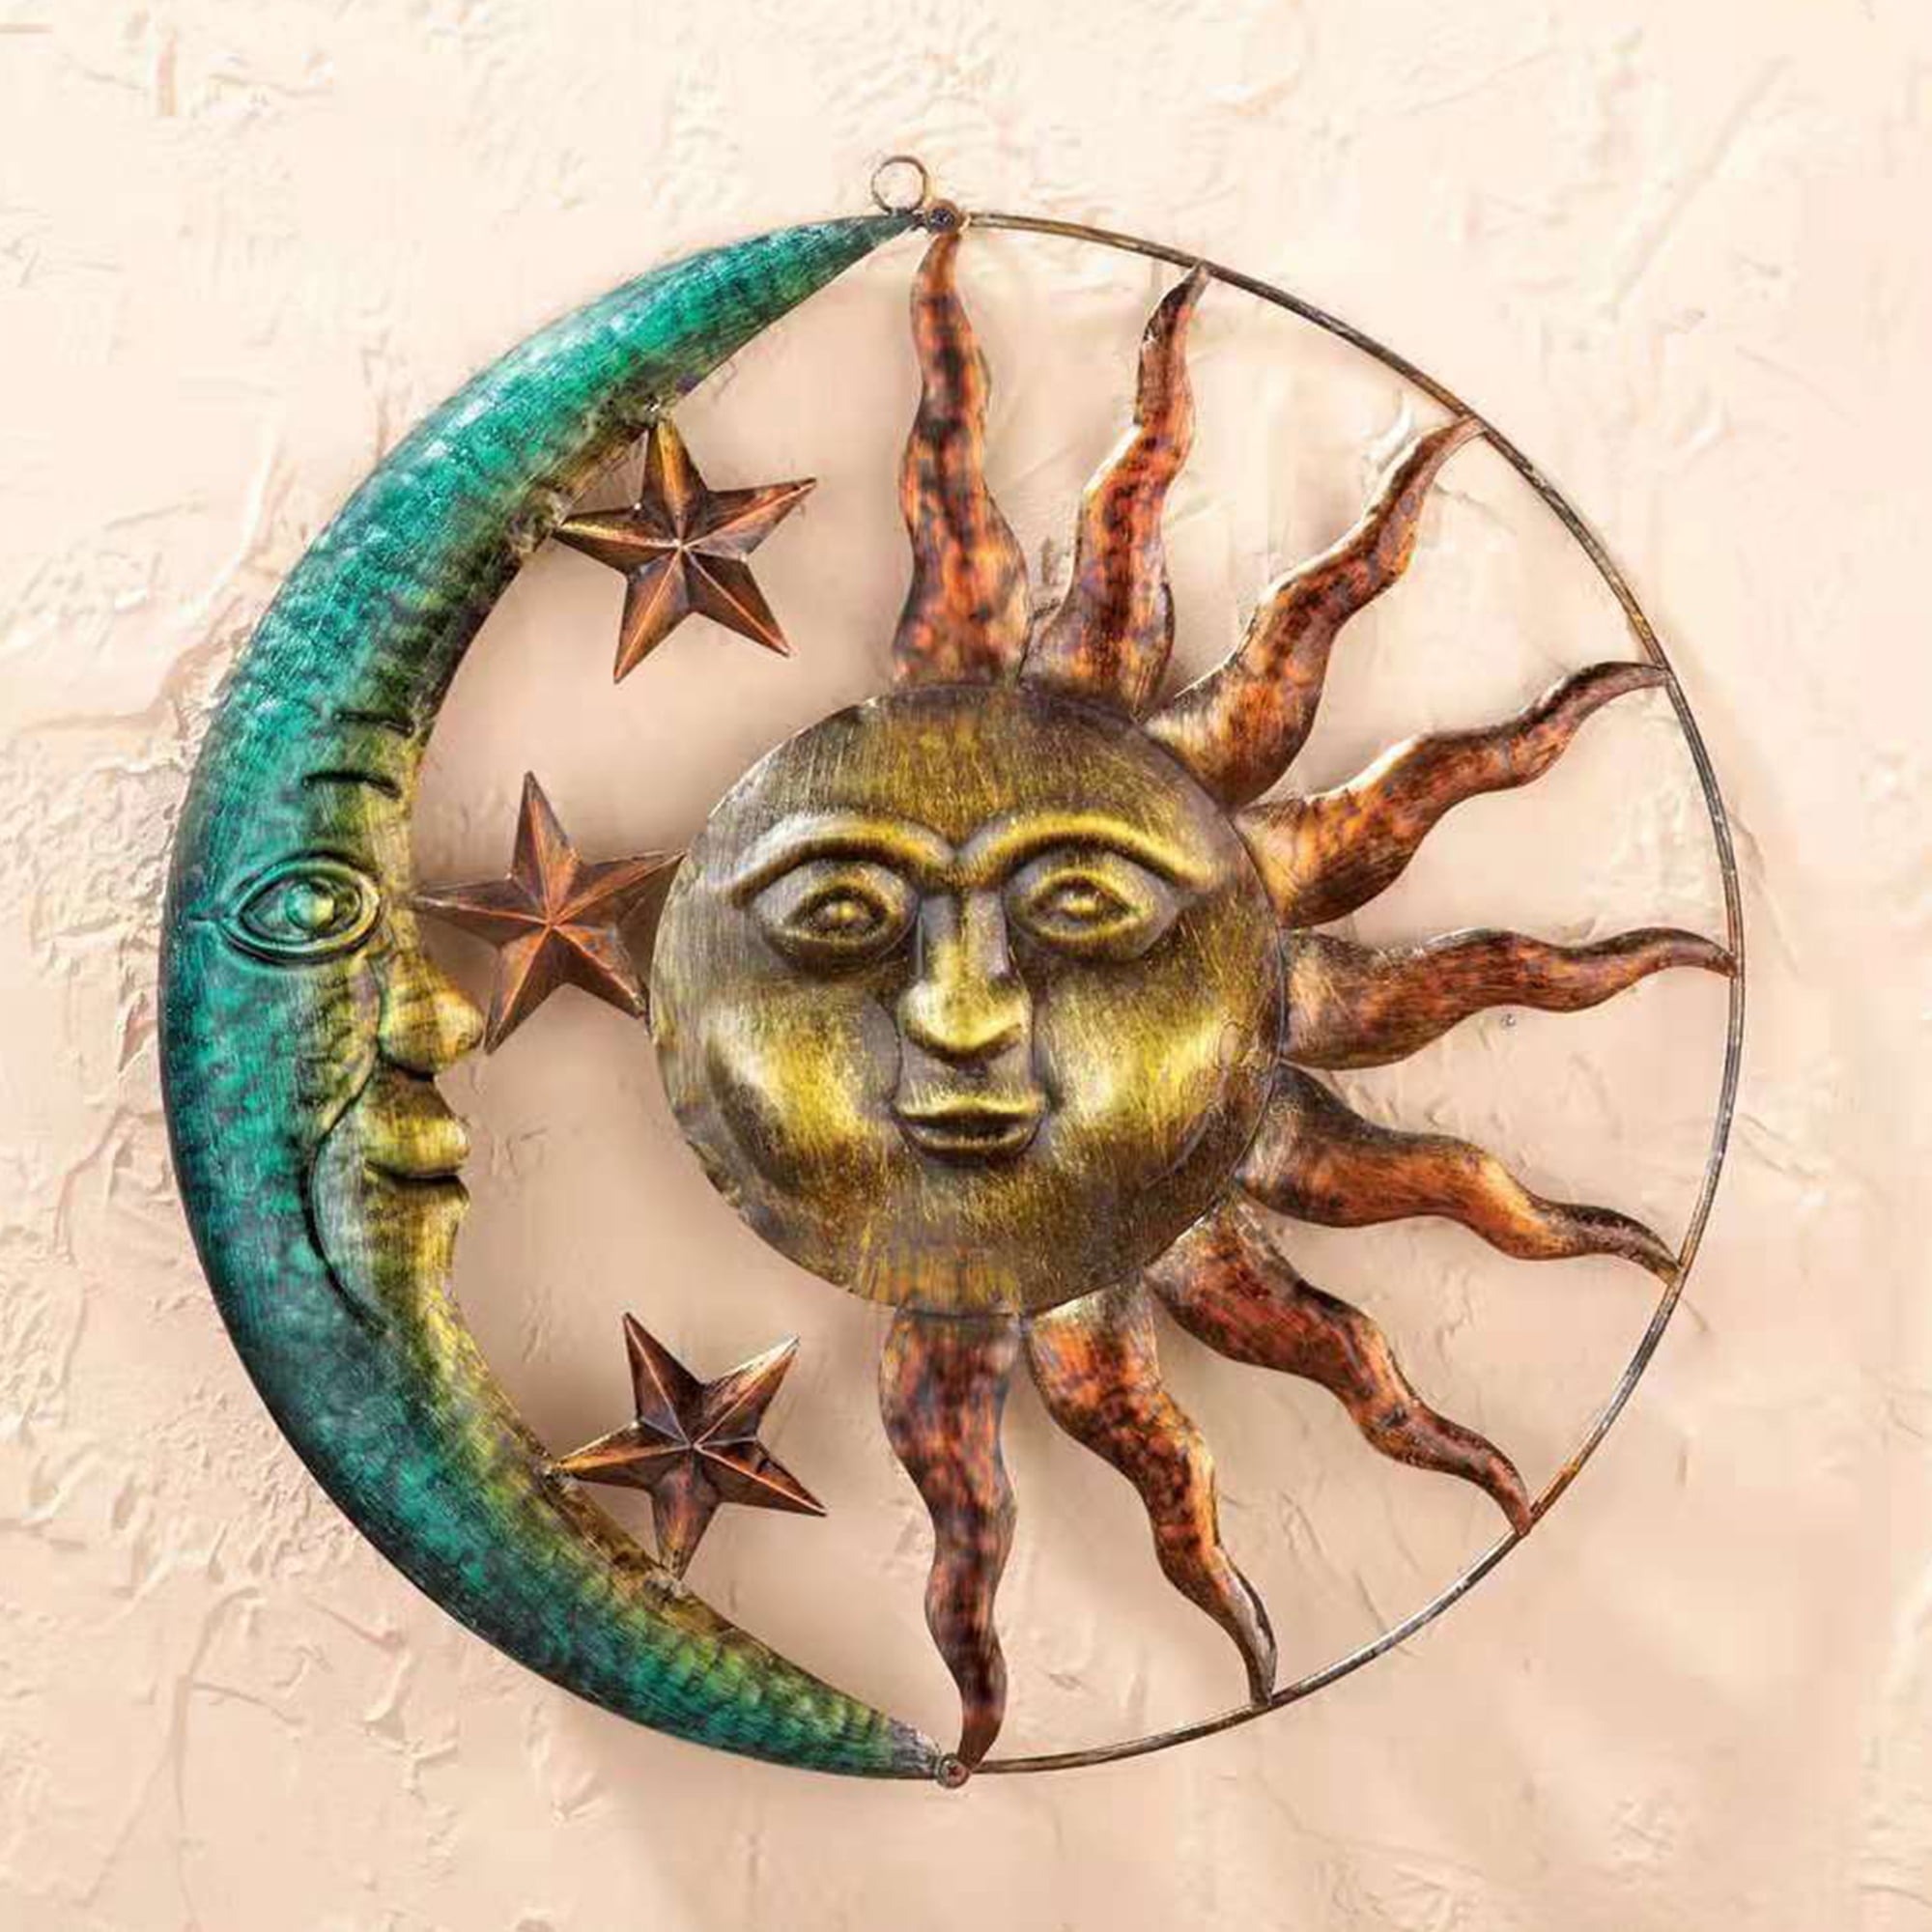 Colorful Home Decor Sun Home Gifts for Couples Metal Wall Art Sun and Moon  Decor, Plasma Cut, Sun Wall Art,  Handmade Gifts Wall Decor 